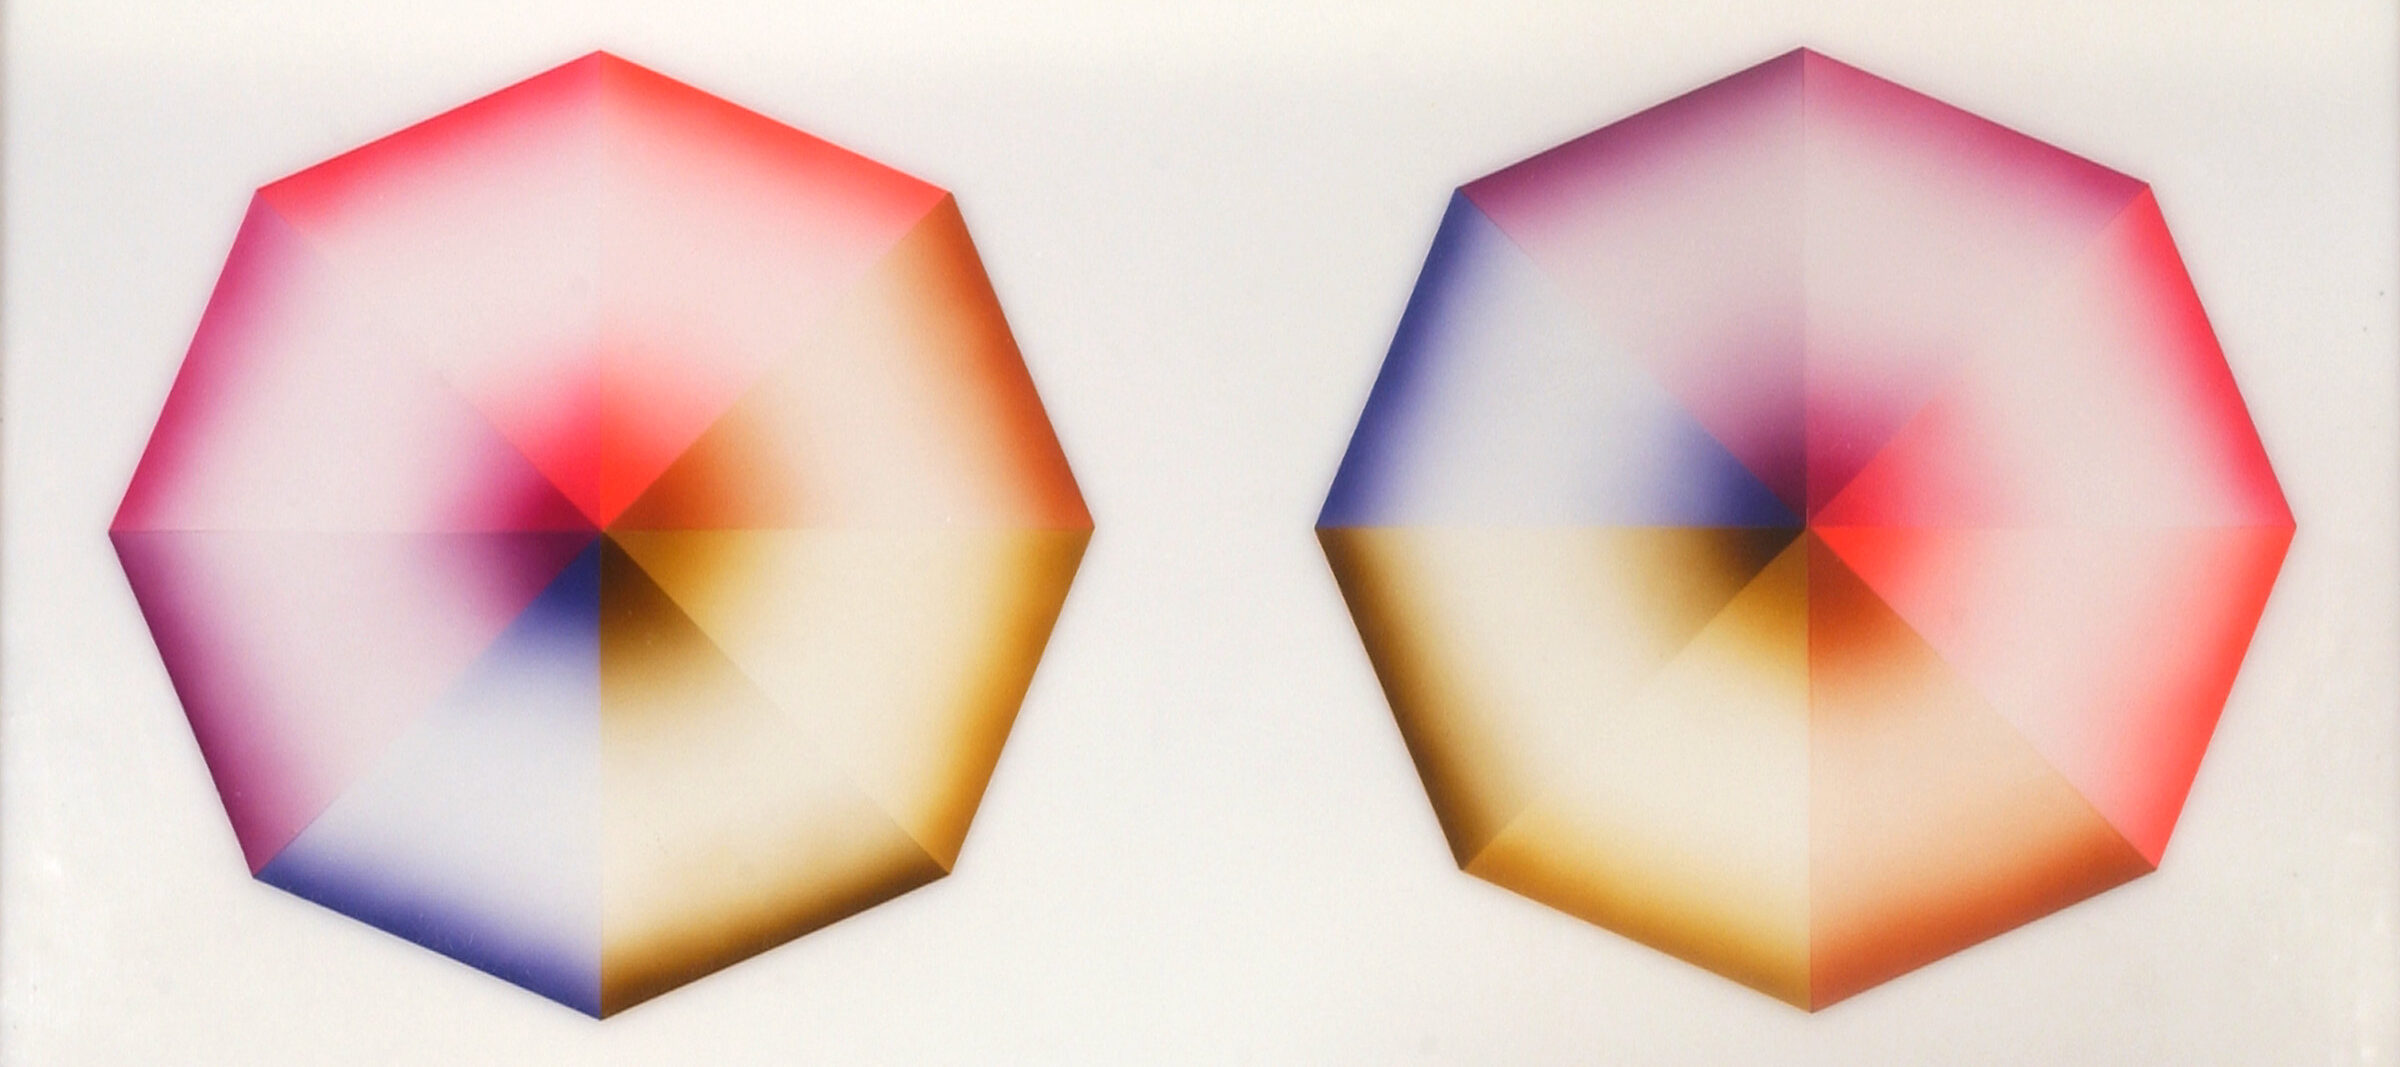 Four hard-edged octagons, each divided into eight pie-slice shapes painted red, pink, orange, yellow, olive green, blue, violet, or lavender, occupy a square, white background. Dark at the wide and narrow ends of each wedge, the hues create the illusion of 3-dimensional forms.